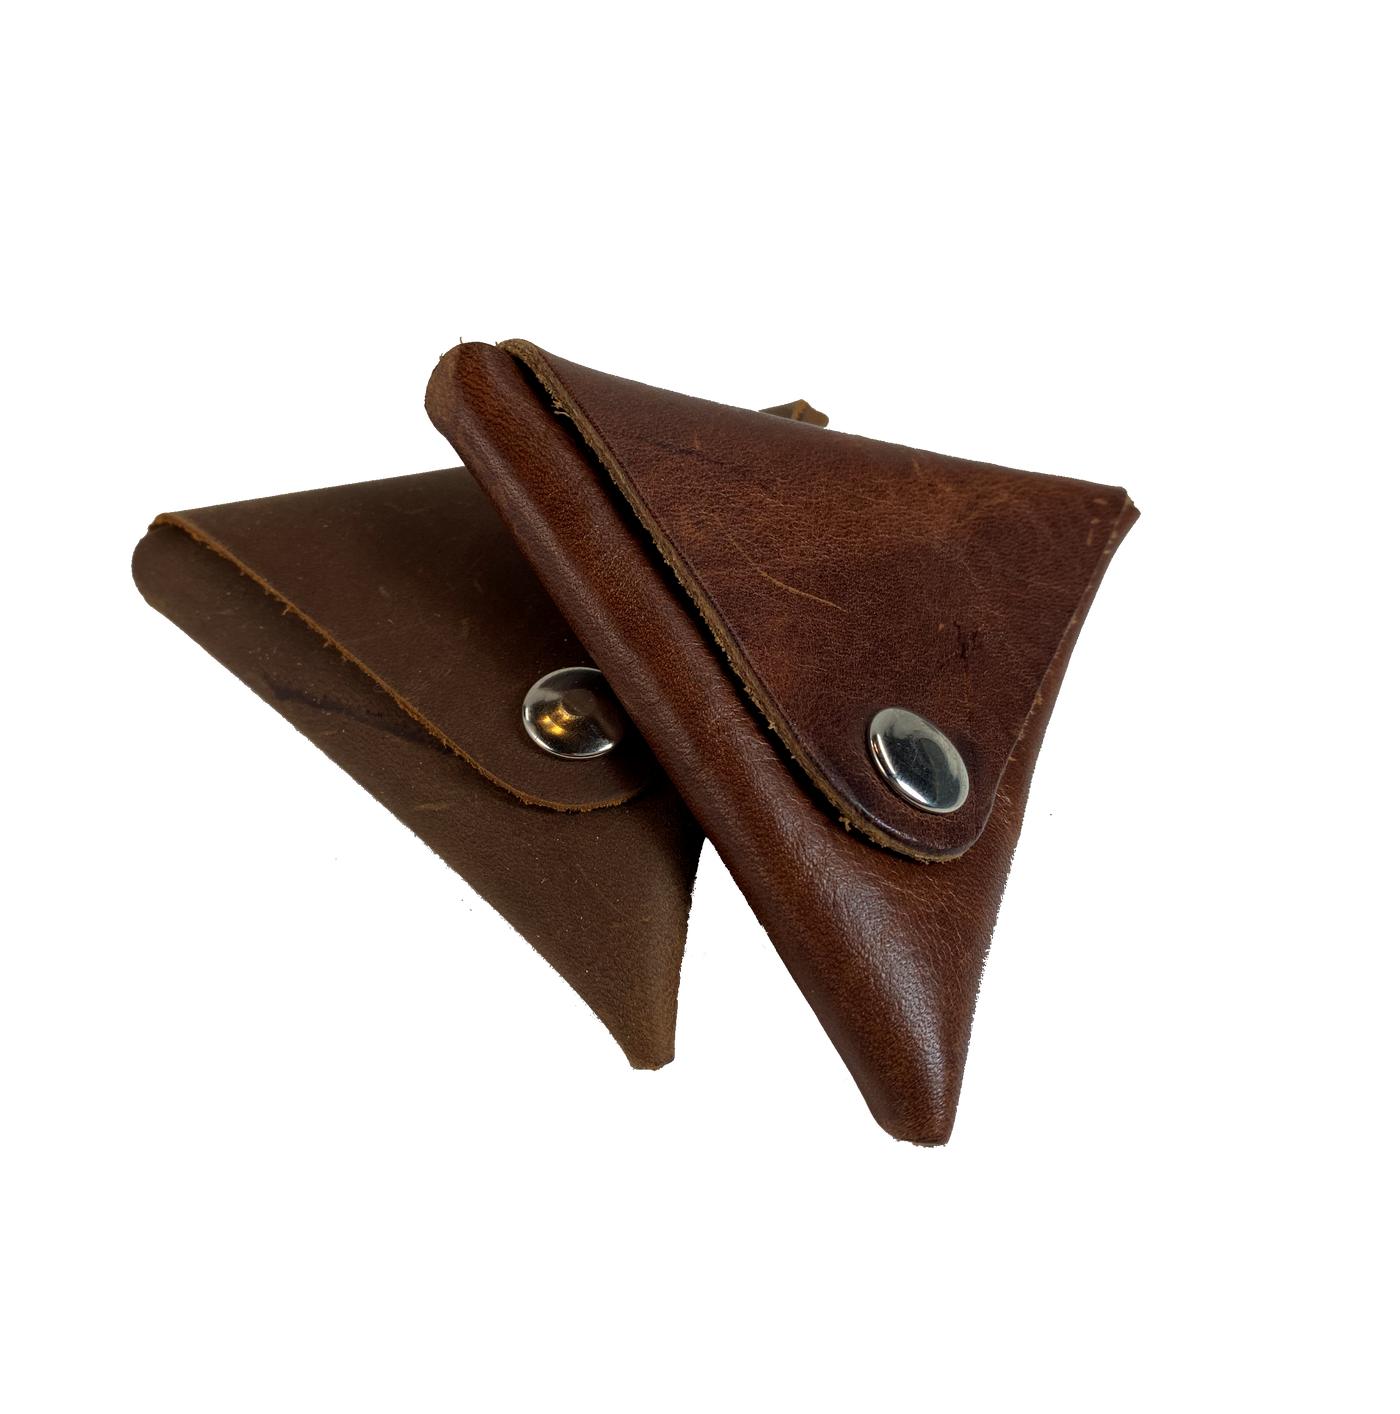 Handmade leather 2 sided coin wallet in shape of triangle with 2 silver colored snap closures on both flat sides so that coins and other small items may be carried.  Fits in the palm of the hand.  Available in either assorted brown or black leather.  Made in USA